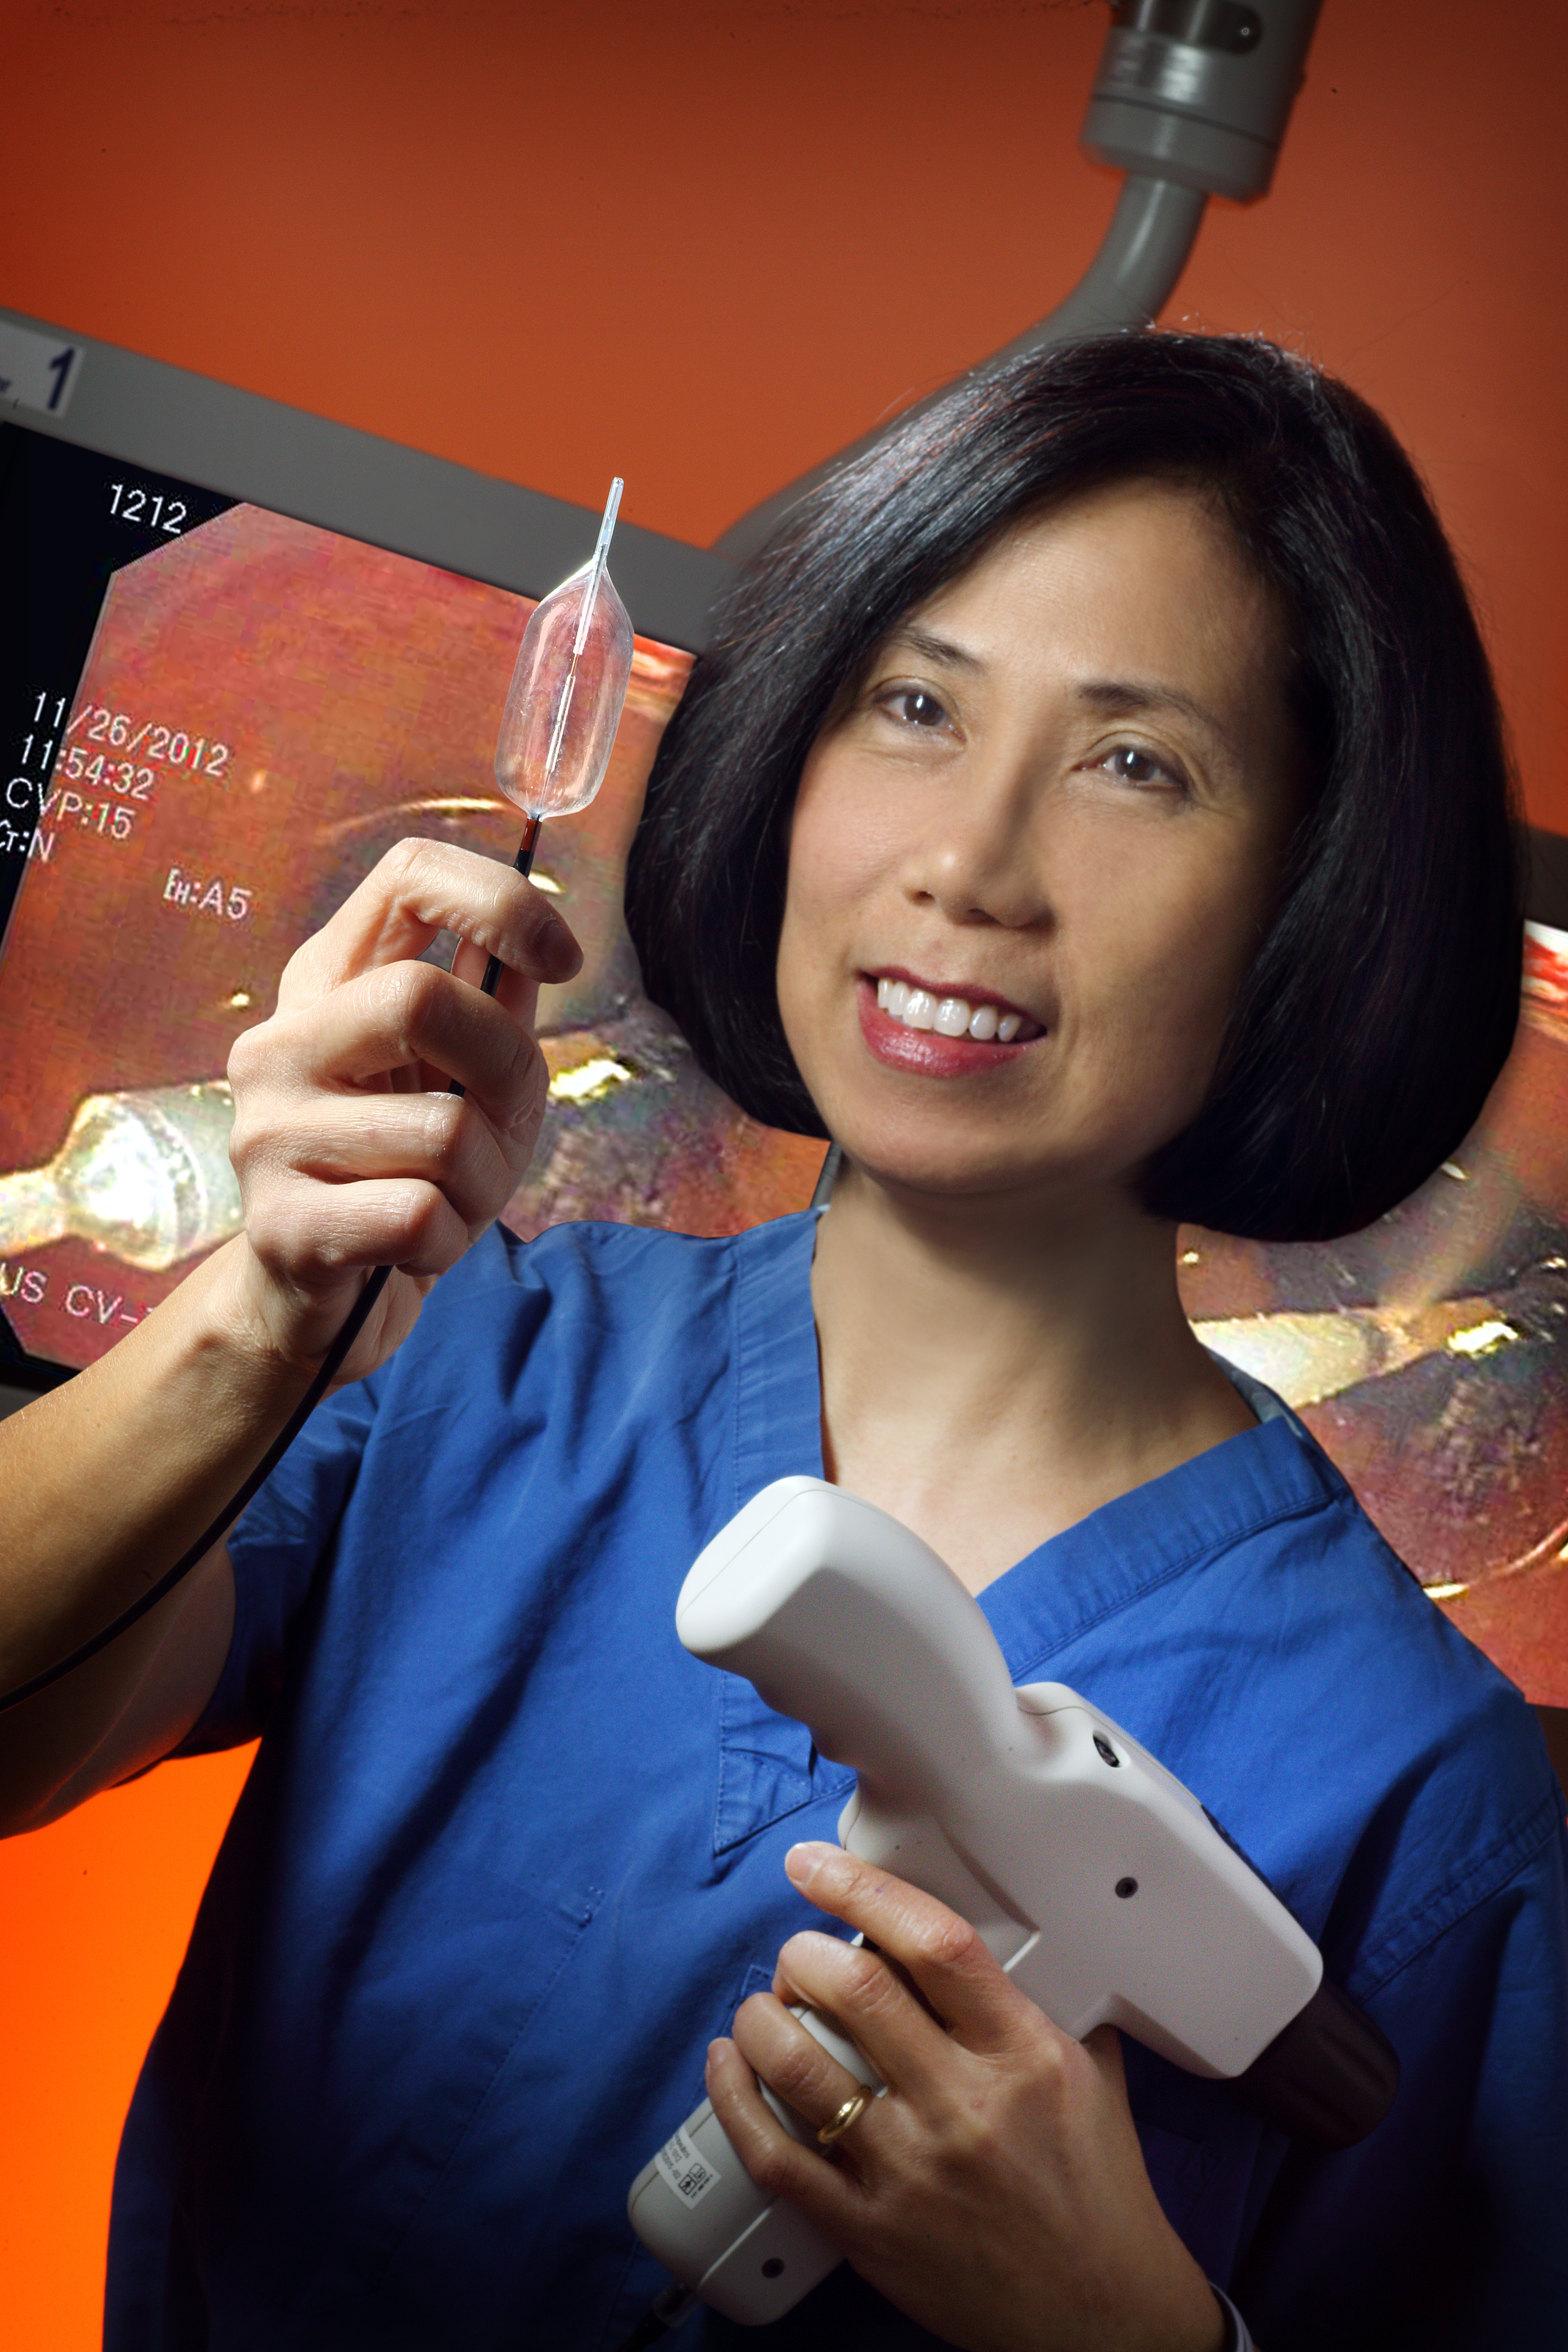 Portrait of Mimi Canto holding a cryoballoon device.